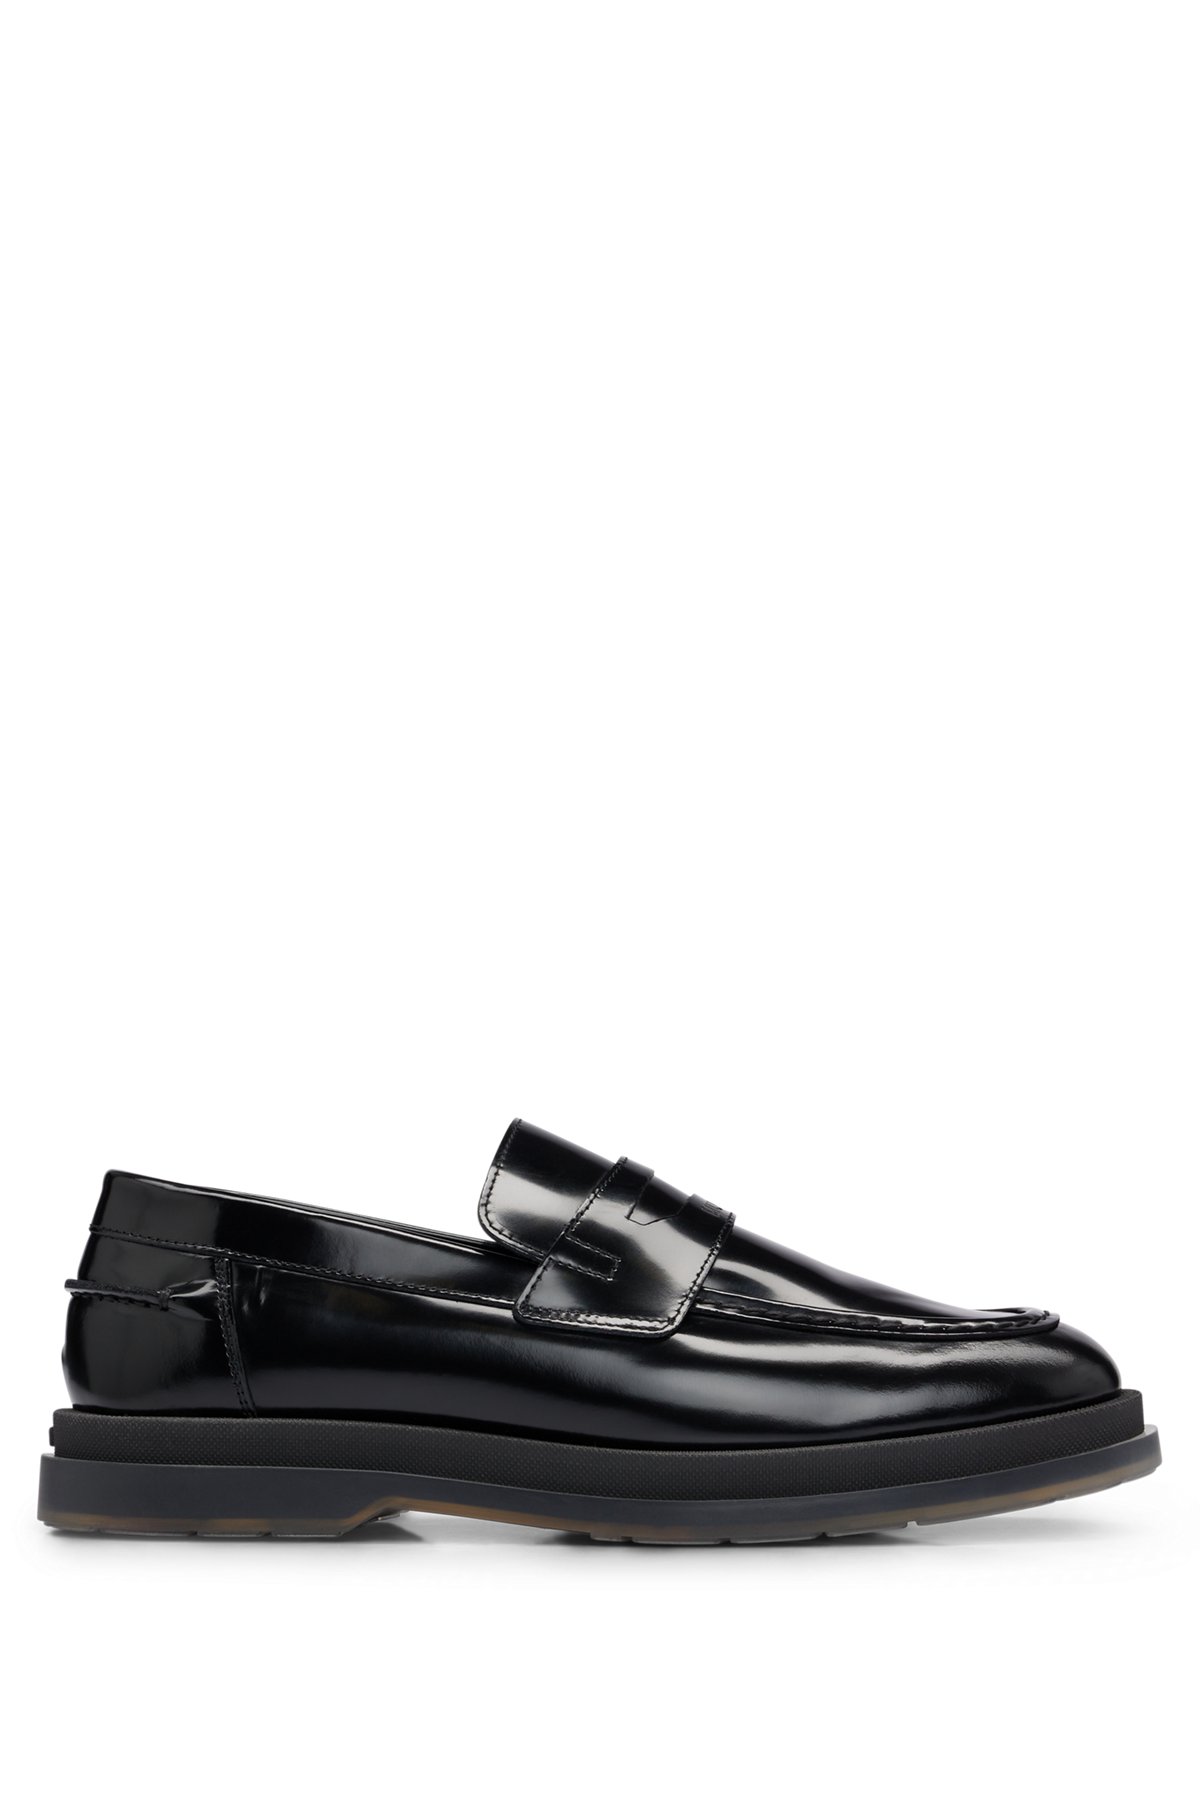 Penny-trim moccasins in brush-off leather, Black